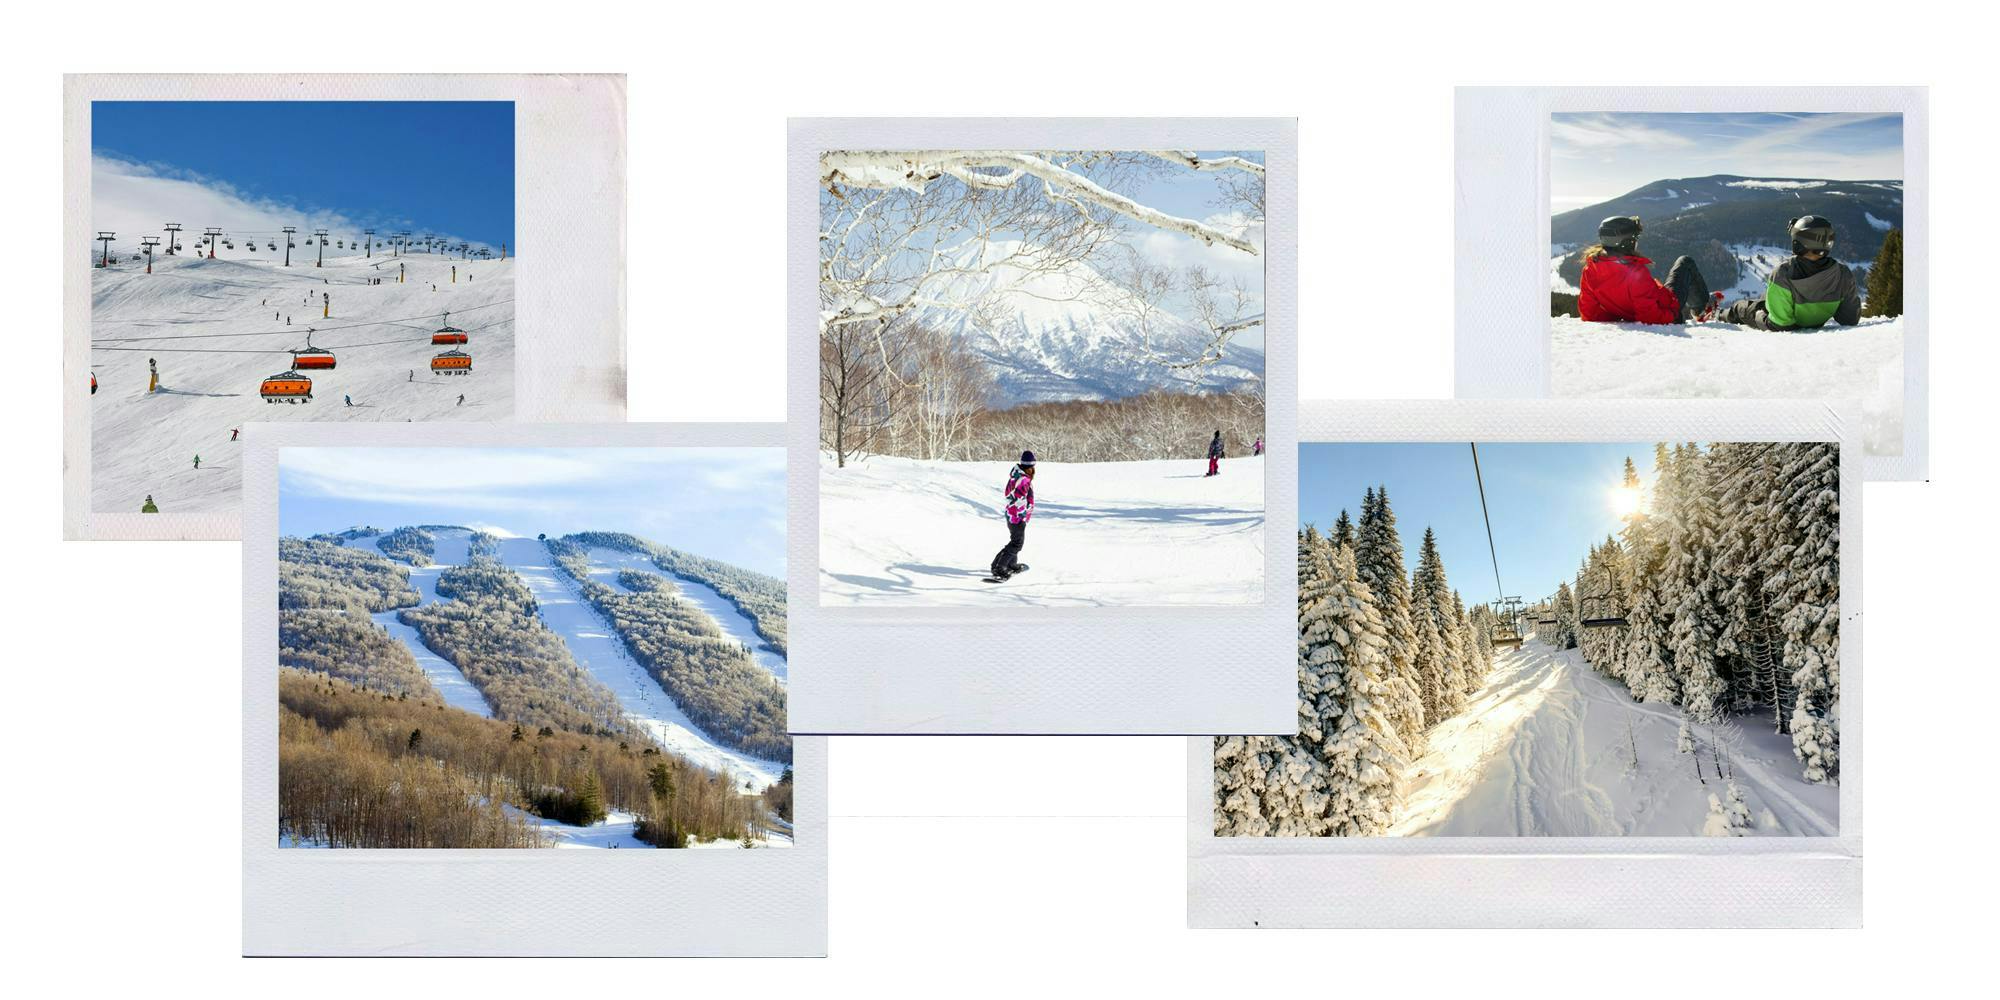 cc0 chatel pp-ur patternpictures.com stockperfect free pattern pattern pictures photos public photospublic.com stockphoto winter sports collage poster advertisement person human ice outdoors nature